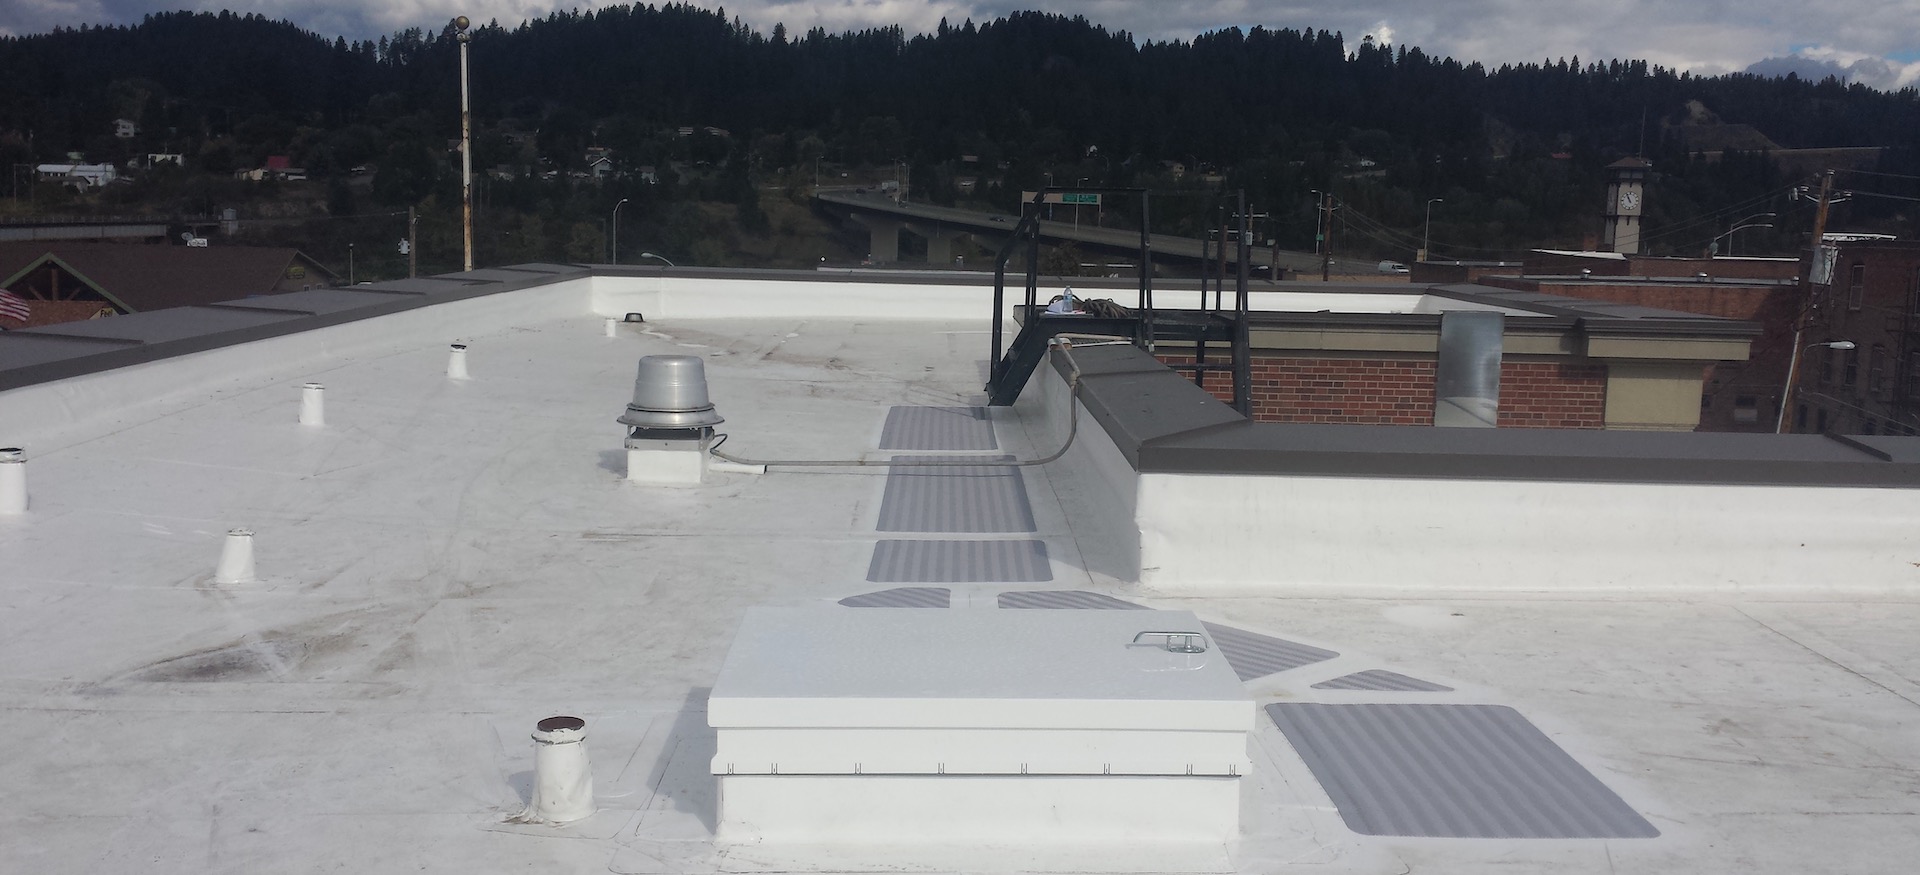 New PVC Roof - United States Post Office Building in Bonners Ferry, Idaho